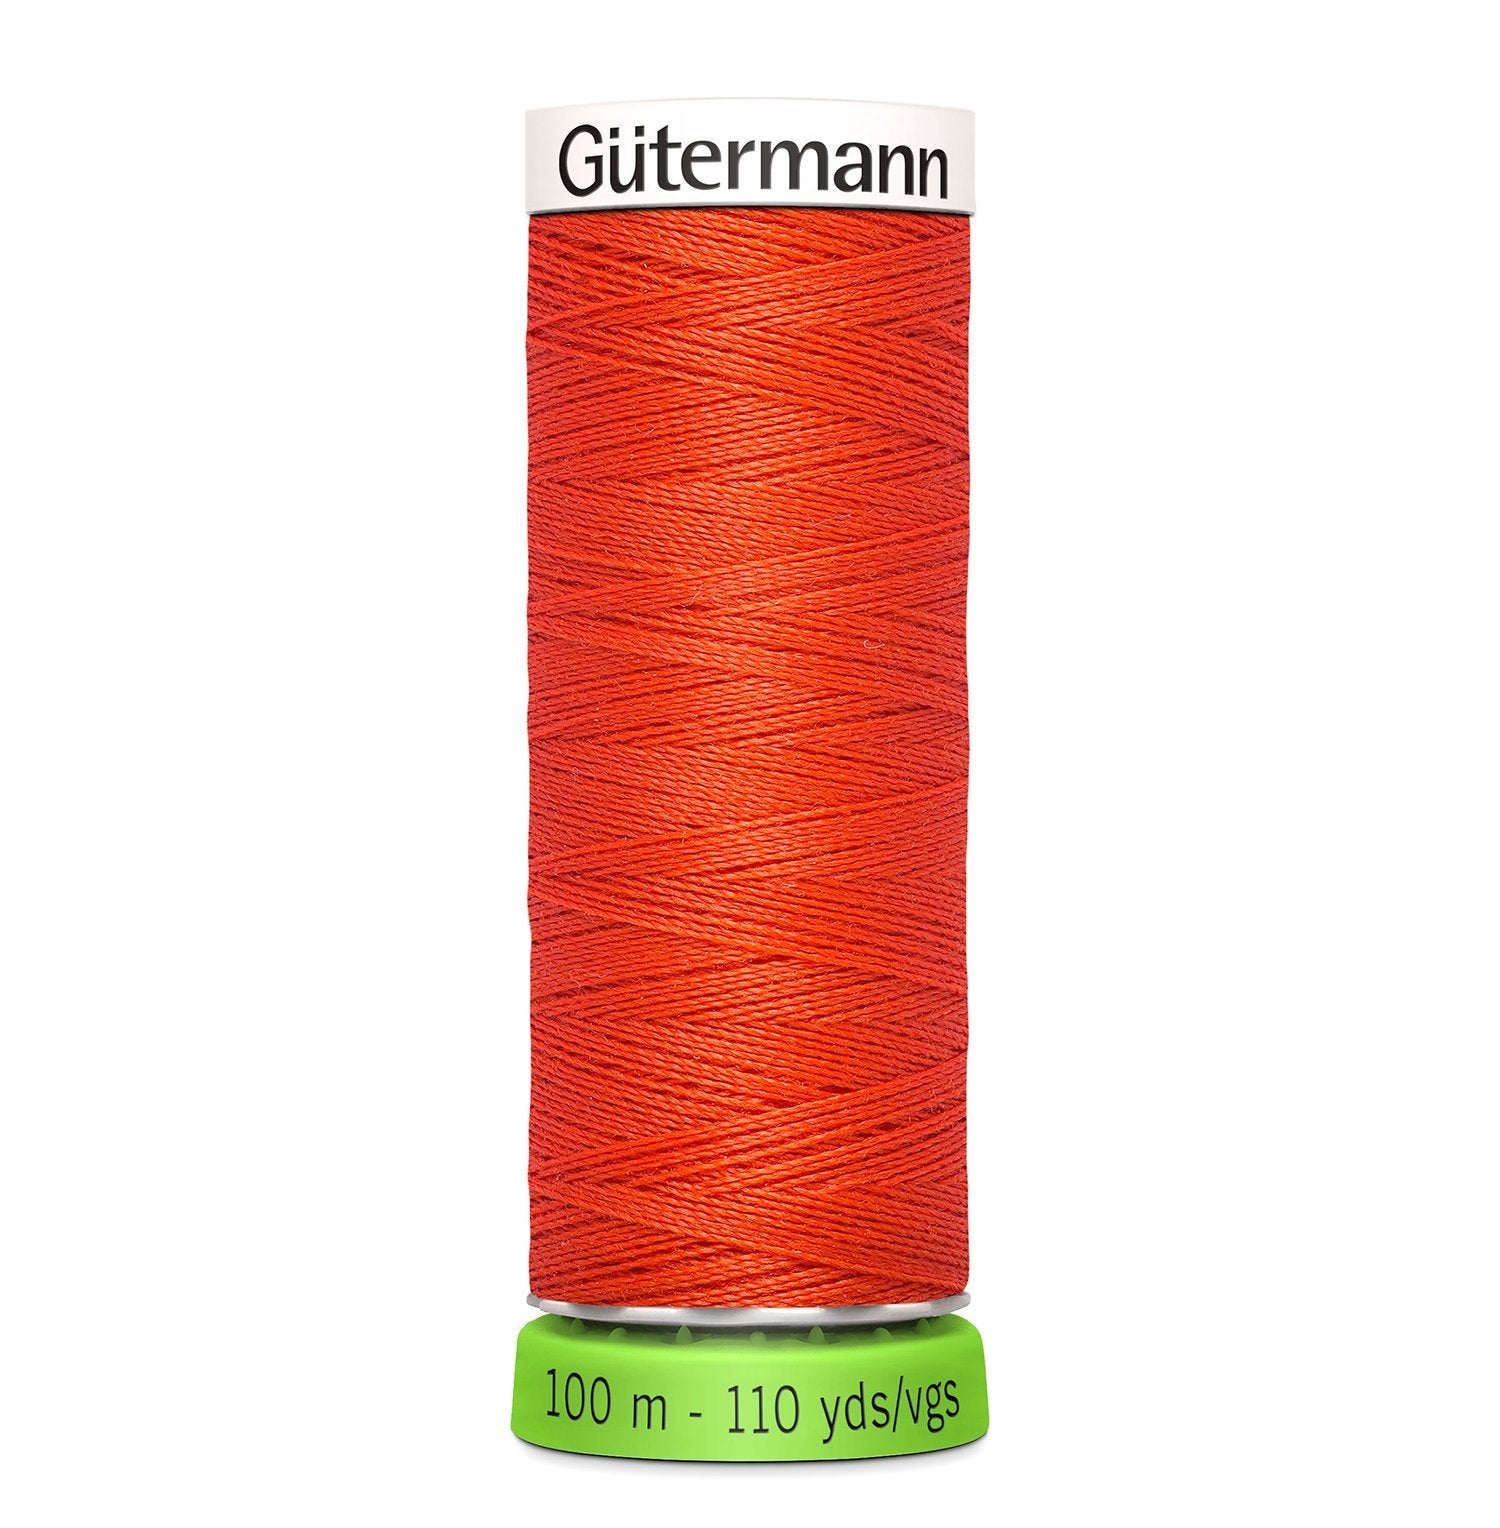 Gutermann Recycled Thread 100m, Colour 155 from Jaycotts Sewing Supplies